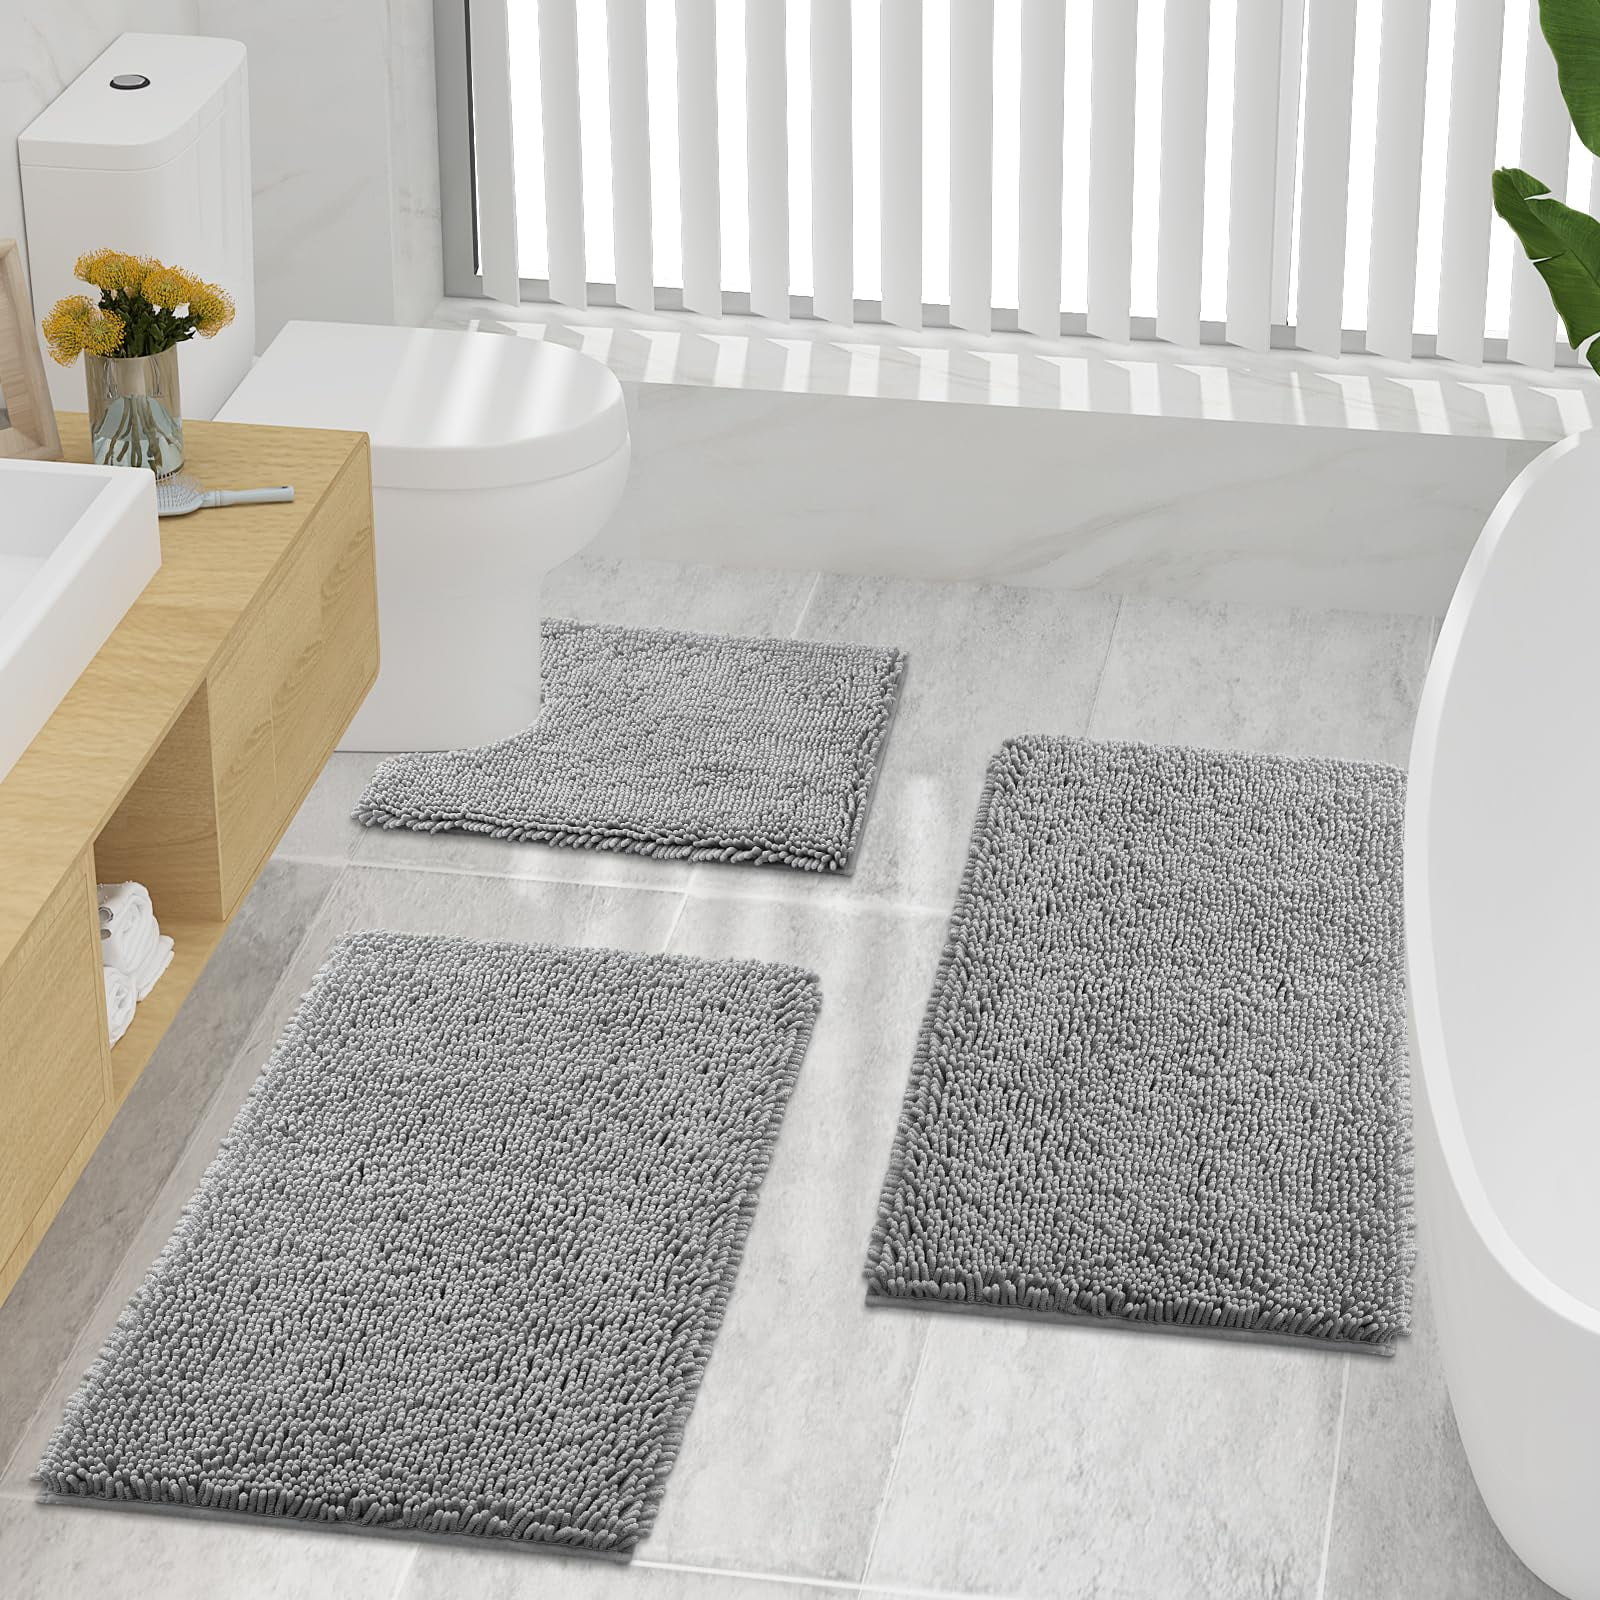 BSICPRO Bathroom Rugs and Mats Sets, 2 Piece Thick Absorbent Chenille Non  Slip, Soft Shaggy Floor Mats, Machine Washable (20 x 47 Plus 16 x 24